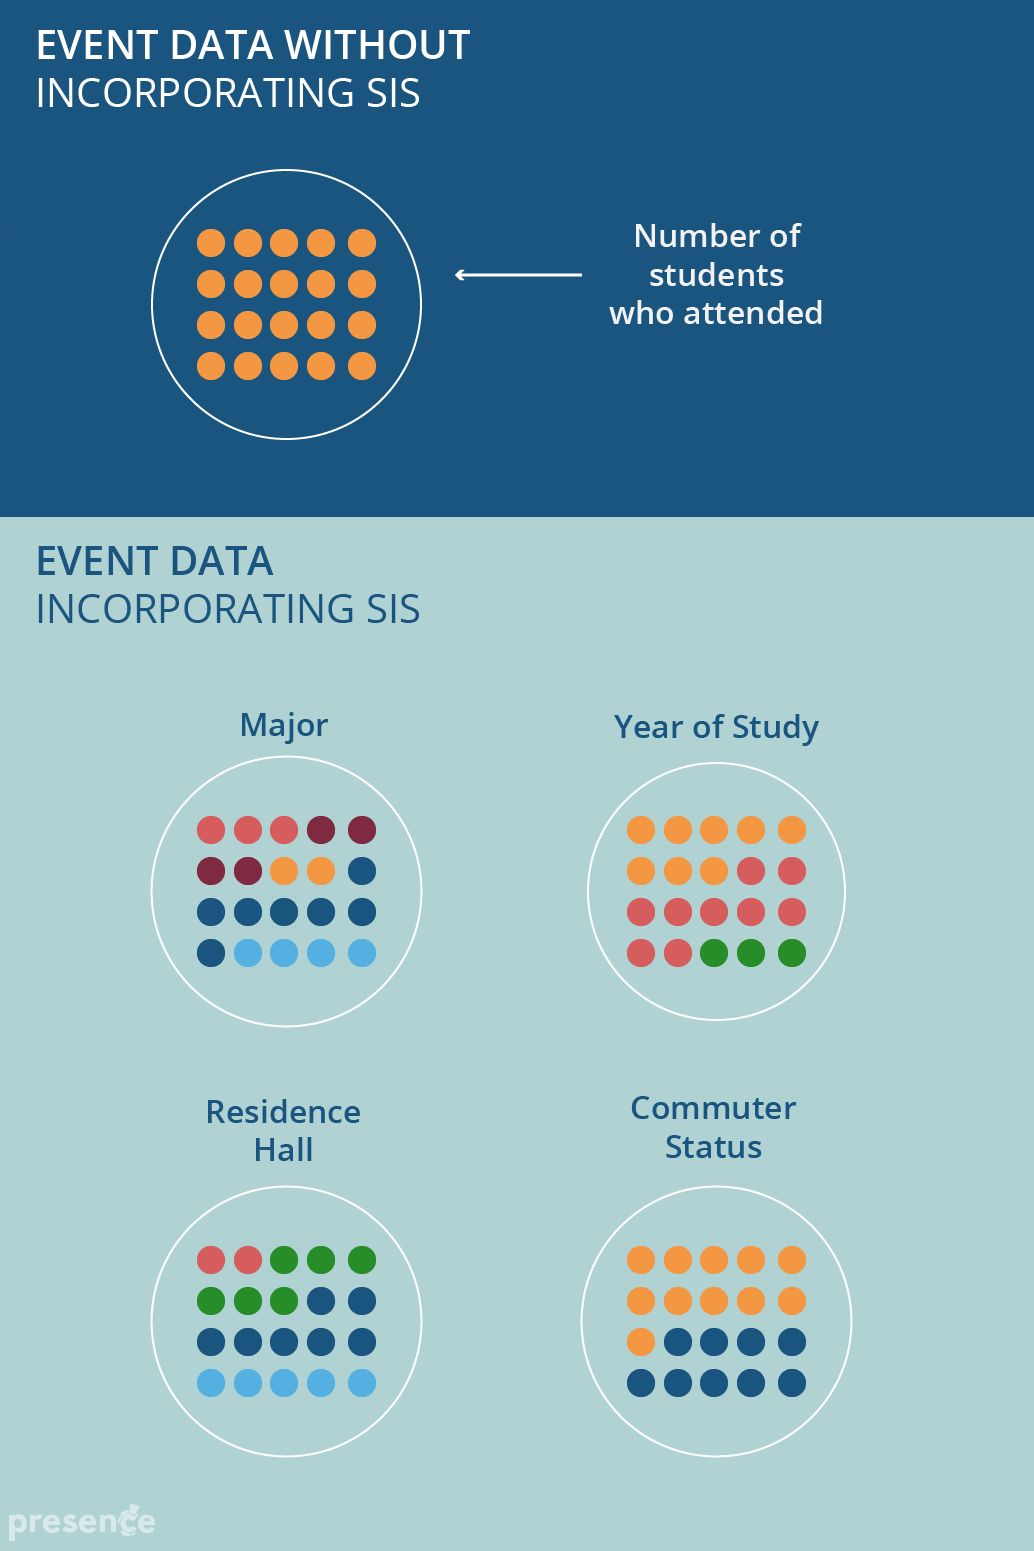 Using SIS data to analyze your campus programs